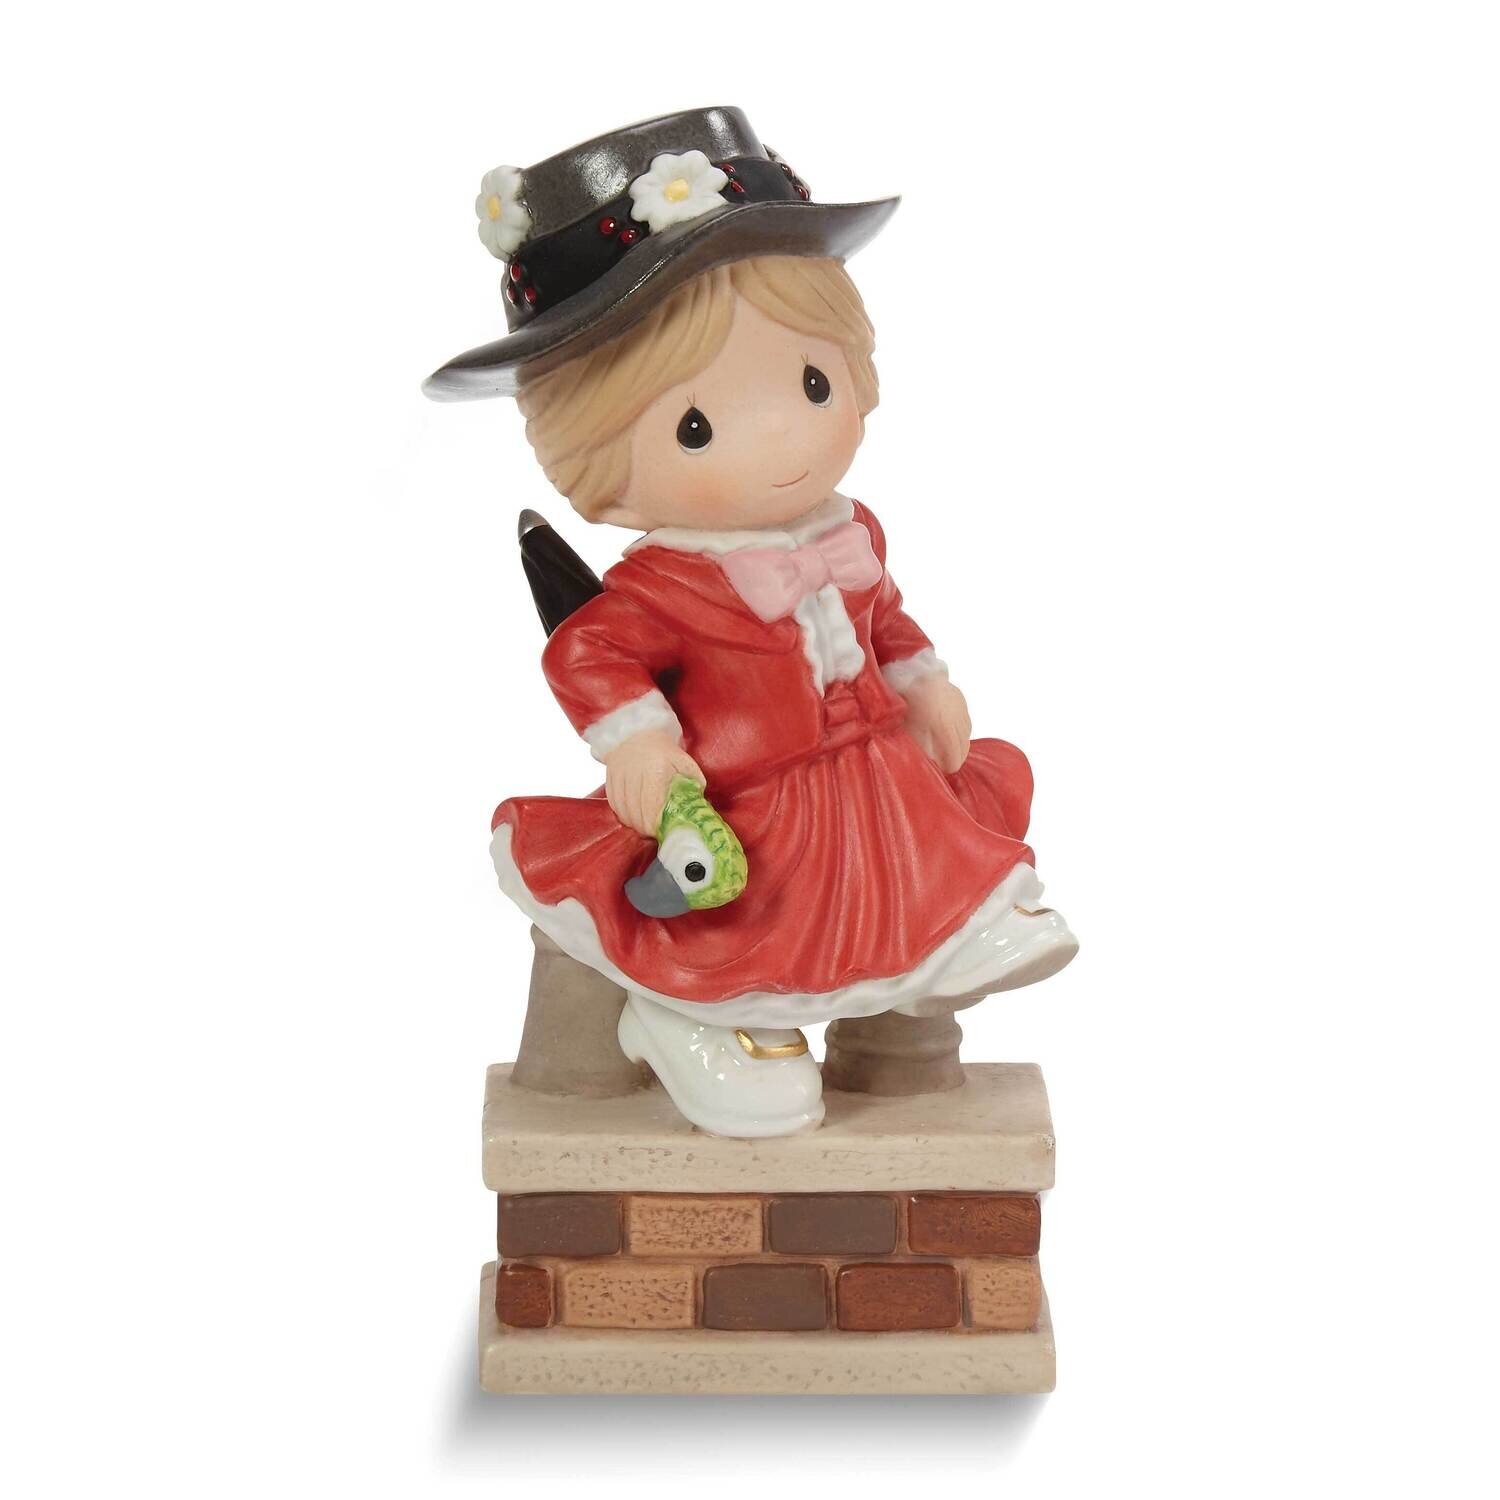 Precious Moments Disney Mary Poppins In Red Dress Figurine GM25336